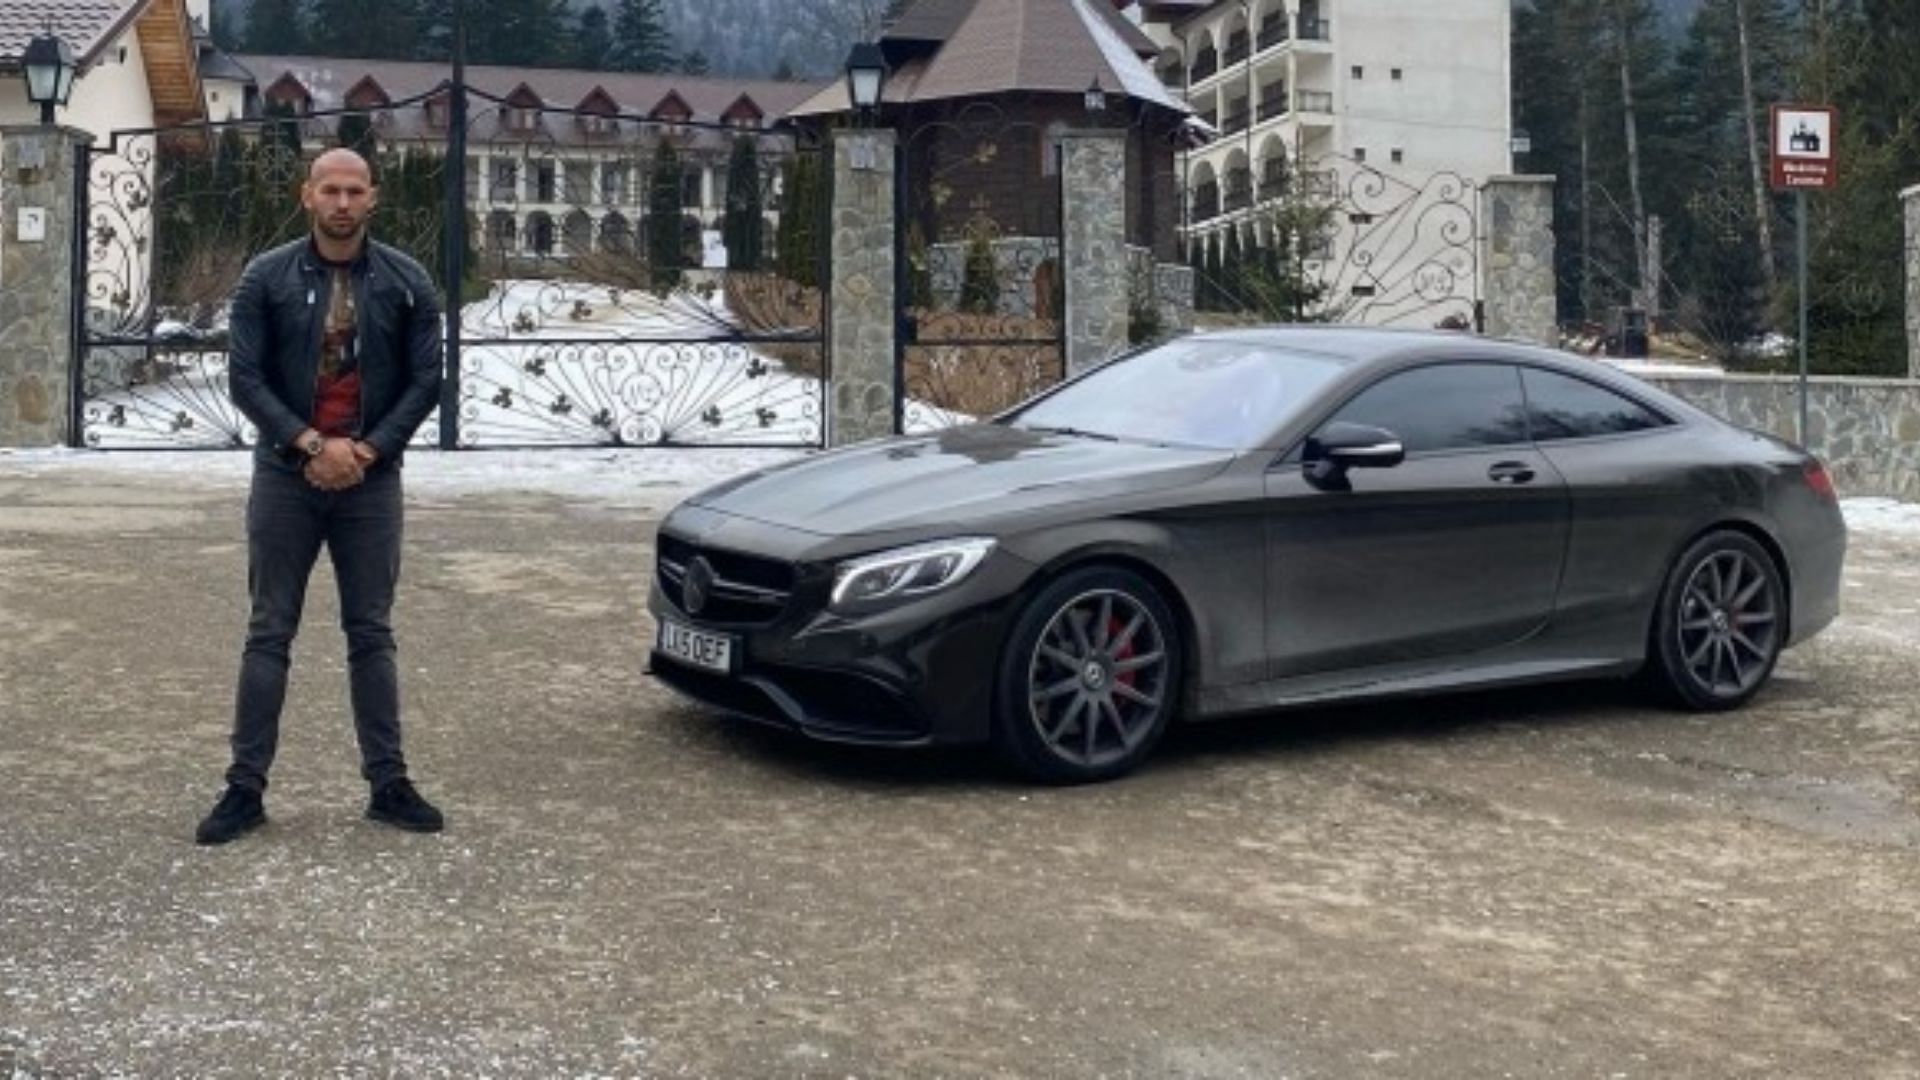 Tate & # 039;  s $140,000 Mercedes-AMG S63 Coupe (Image via Instagram)